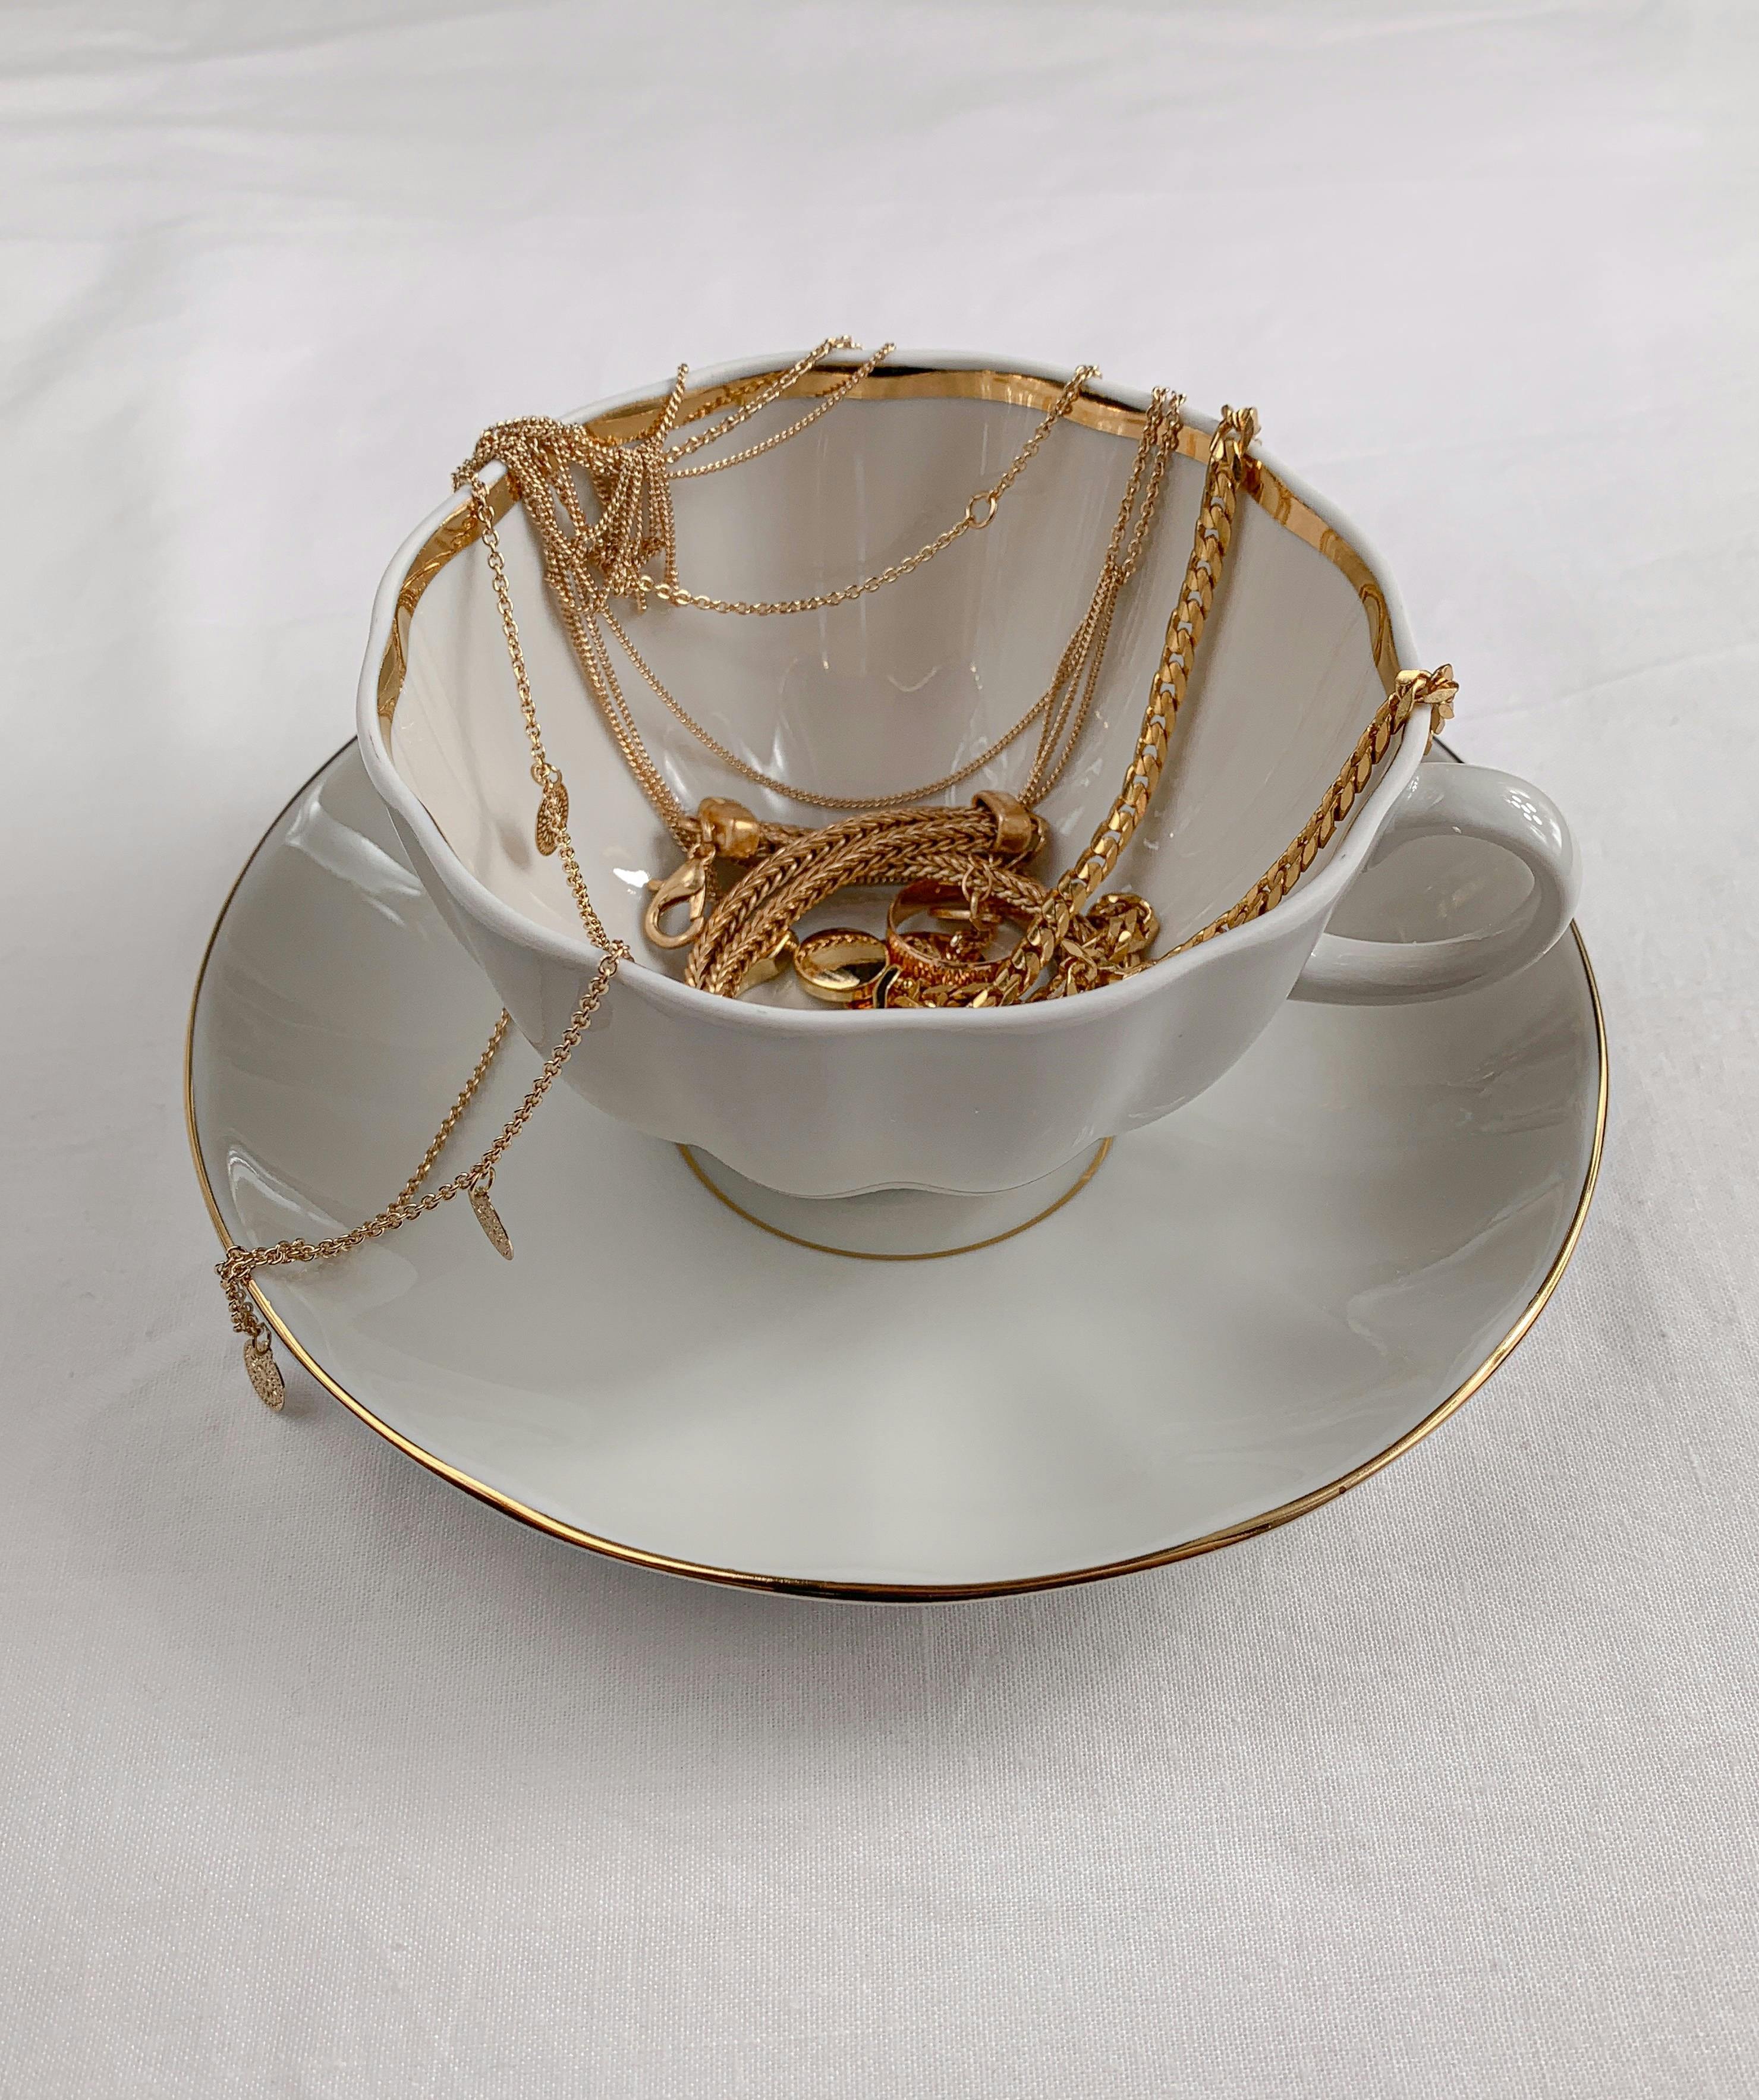 jewelries in a tea cup